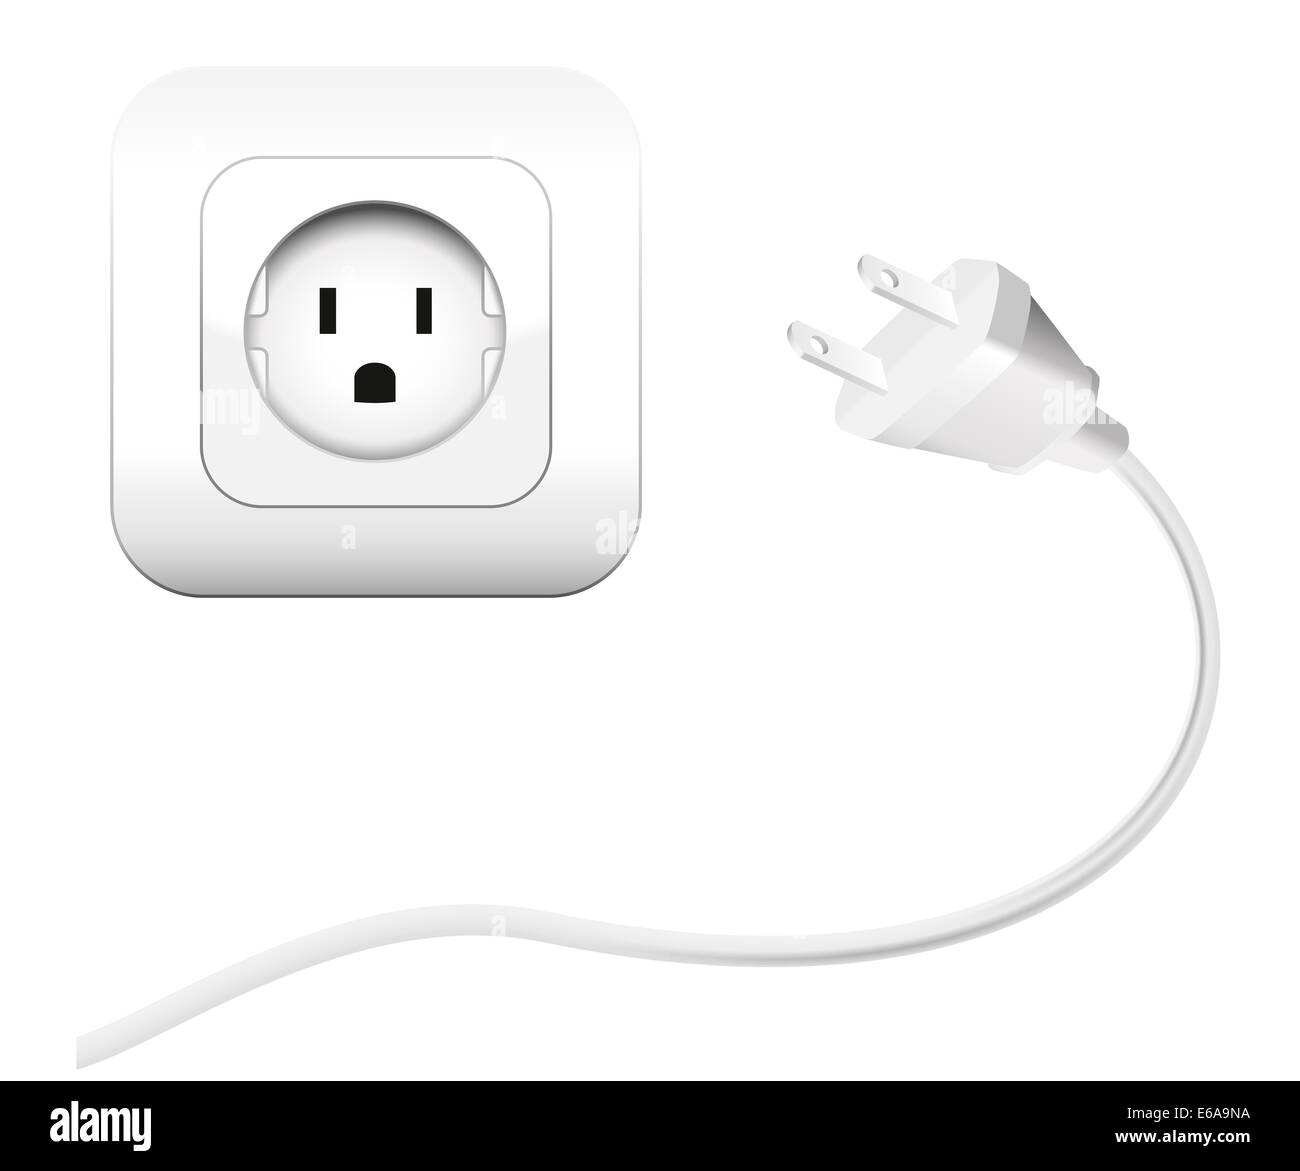 Plug and a socket - NEMA connector – to connect electrical equipment. Stock Photo